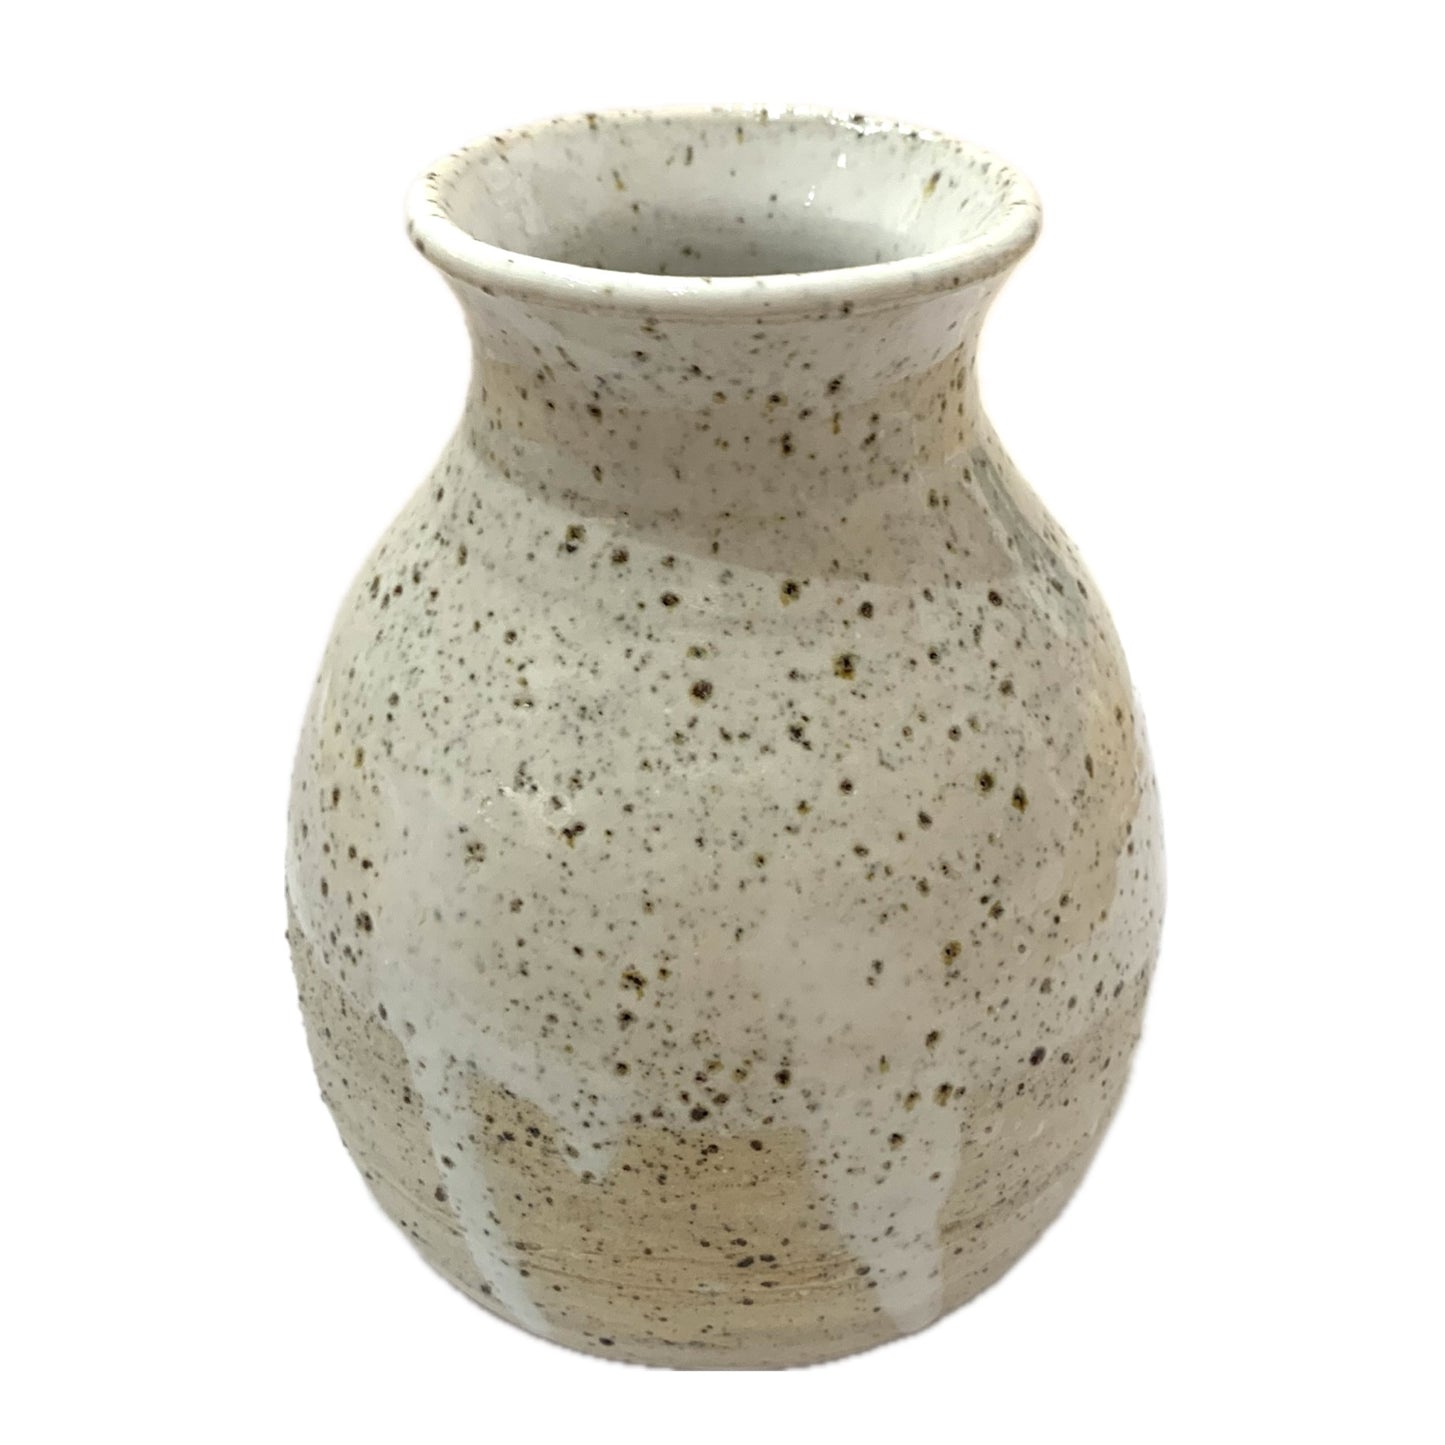 EARTH BY HAND- Small Dribble Vases- White #1- Wide Neck